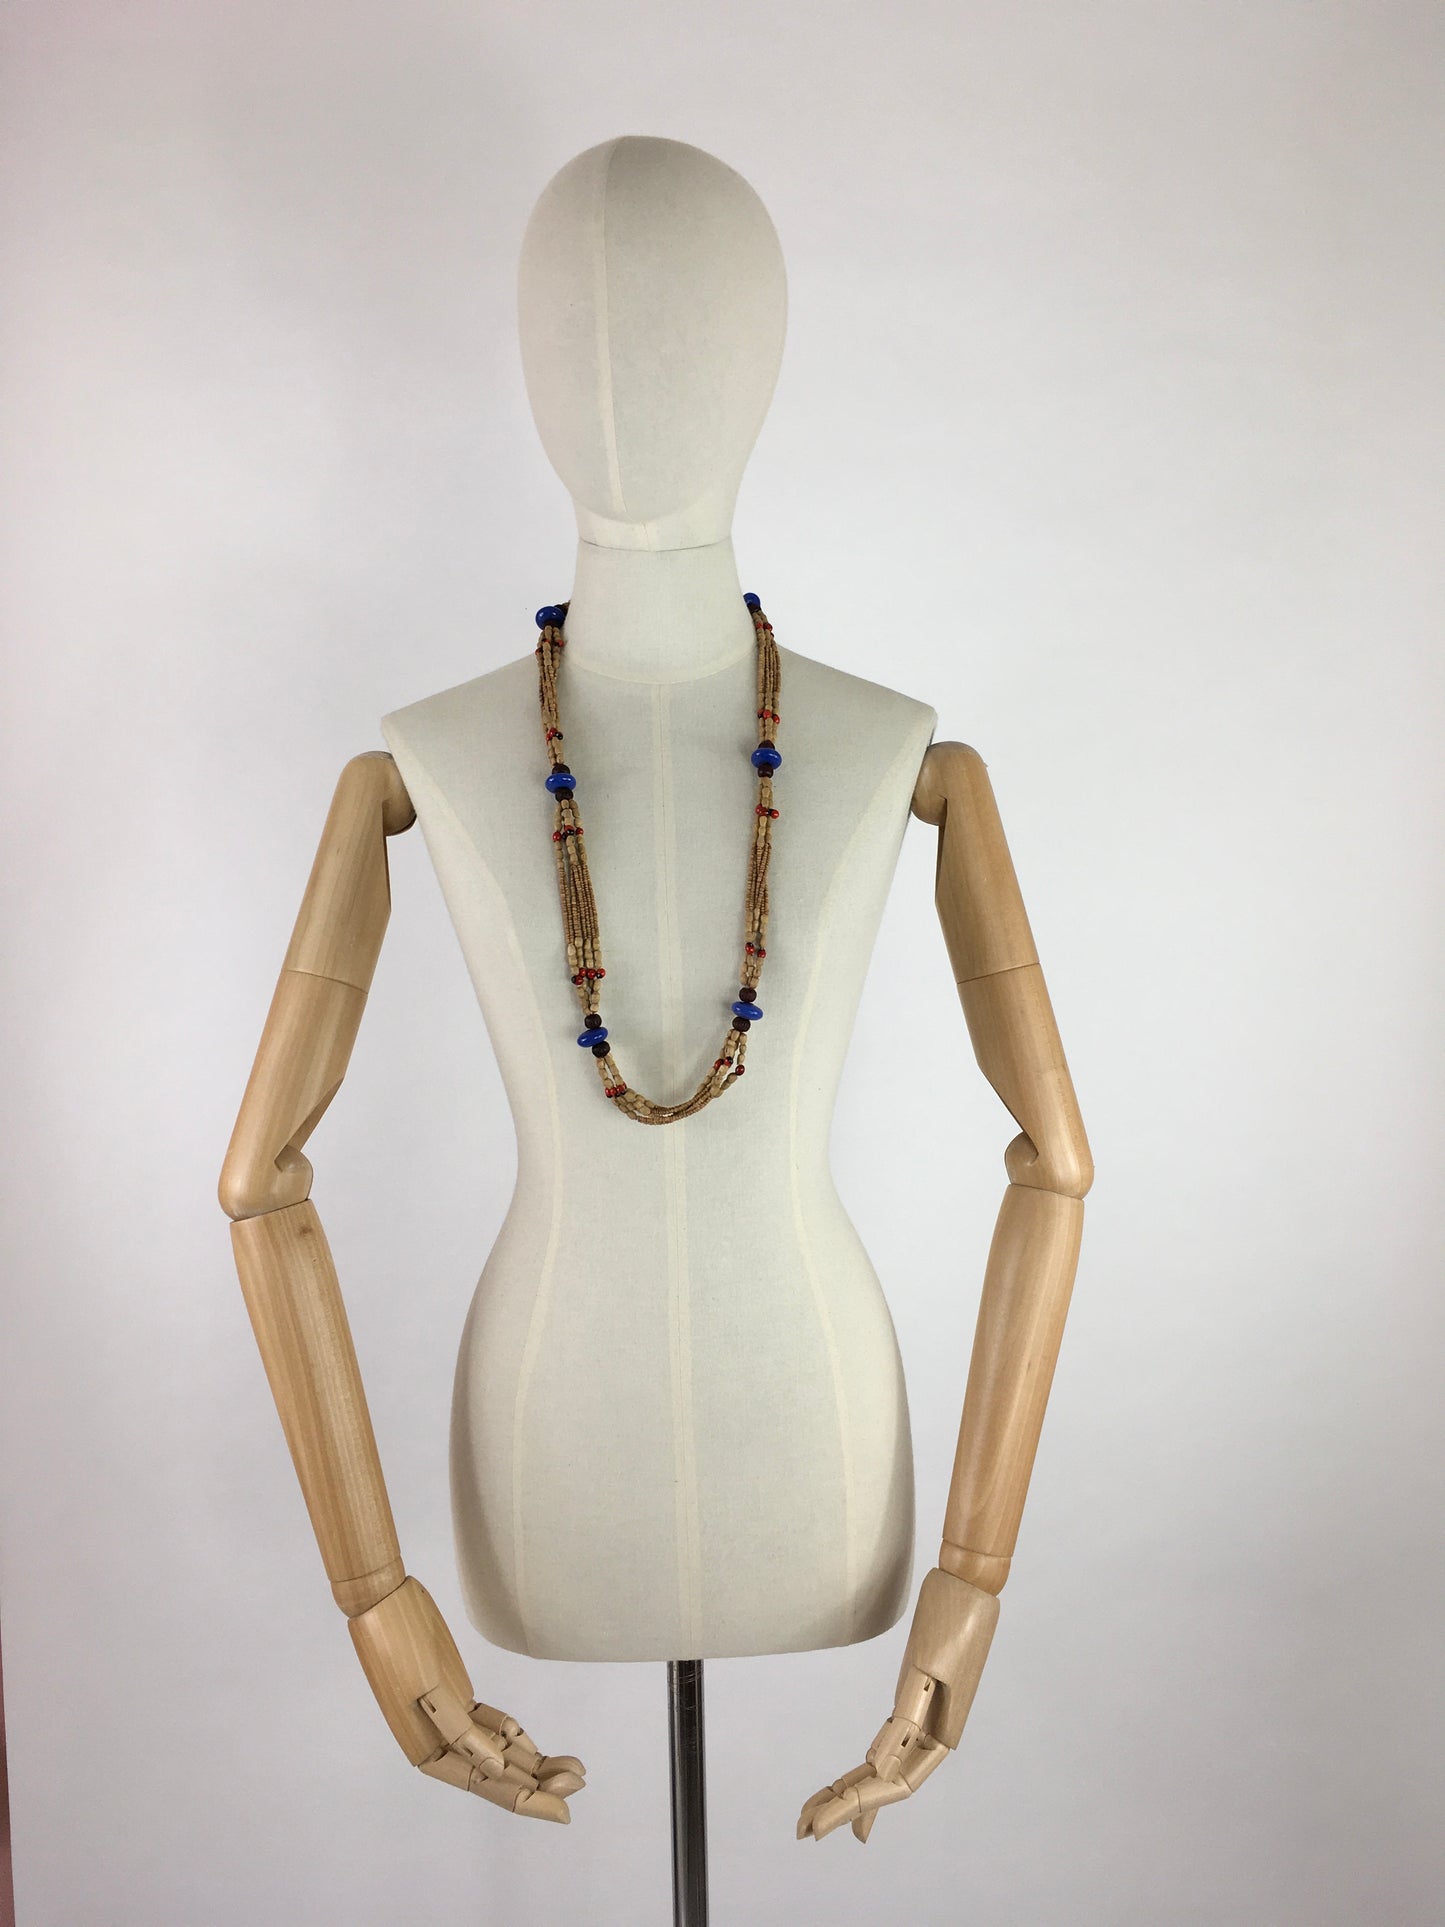 Original 1930s Multistrand Necklace - In Contrasting Wooden and Glass Beads